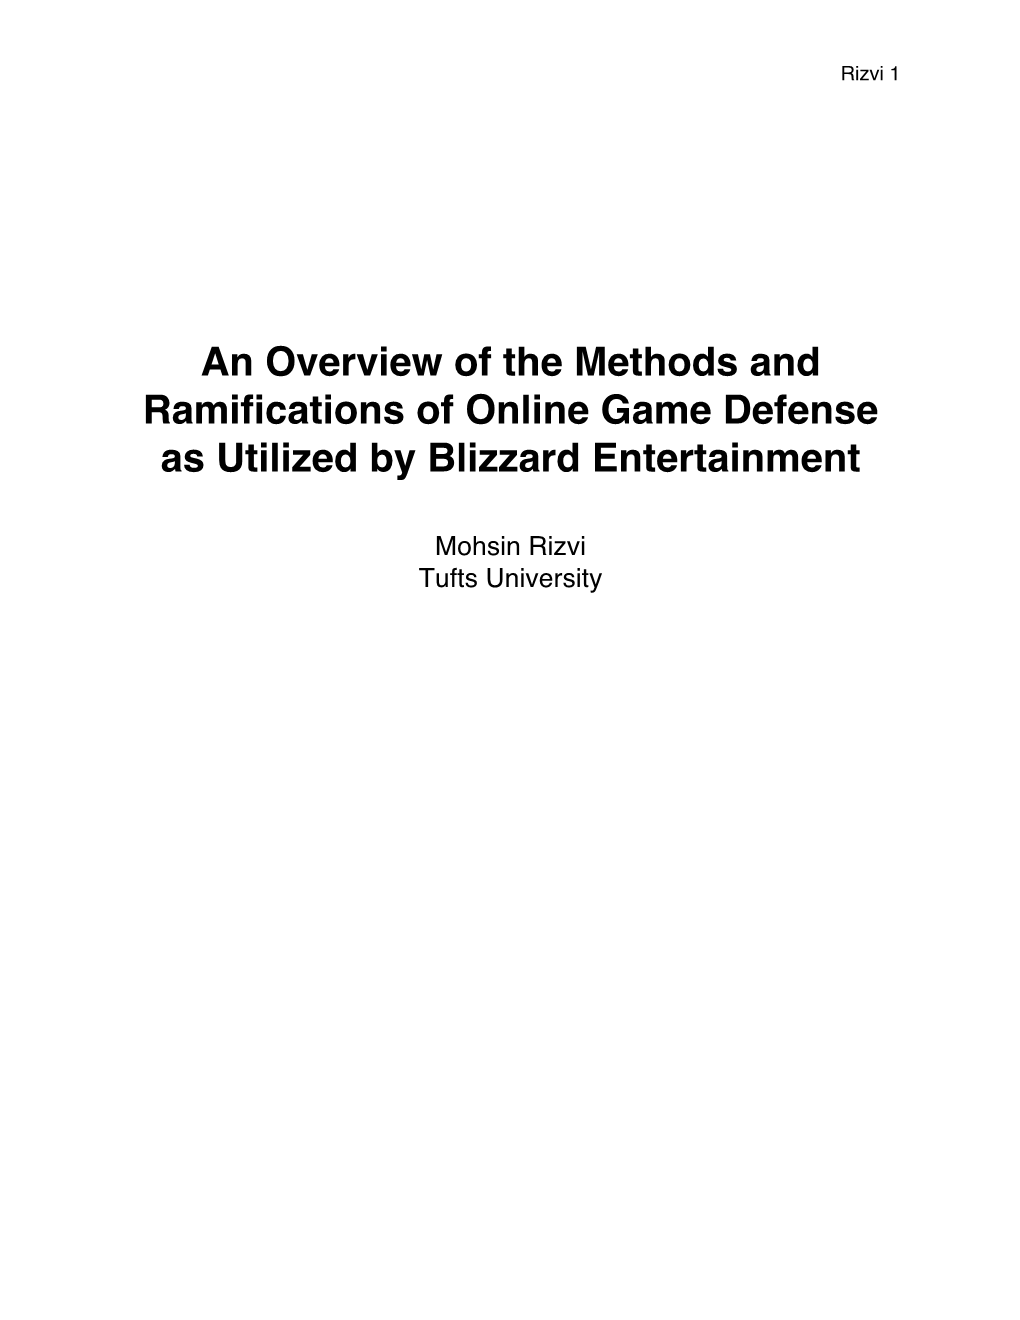 An Overview of the Methods and Ramifications of Online Game Defense As Utilized by Blizzard Entertainment